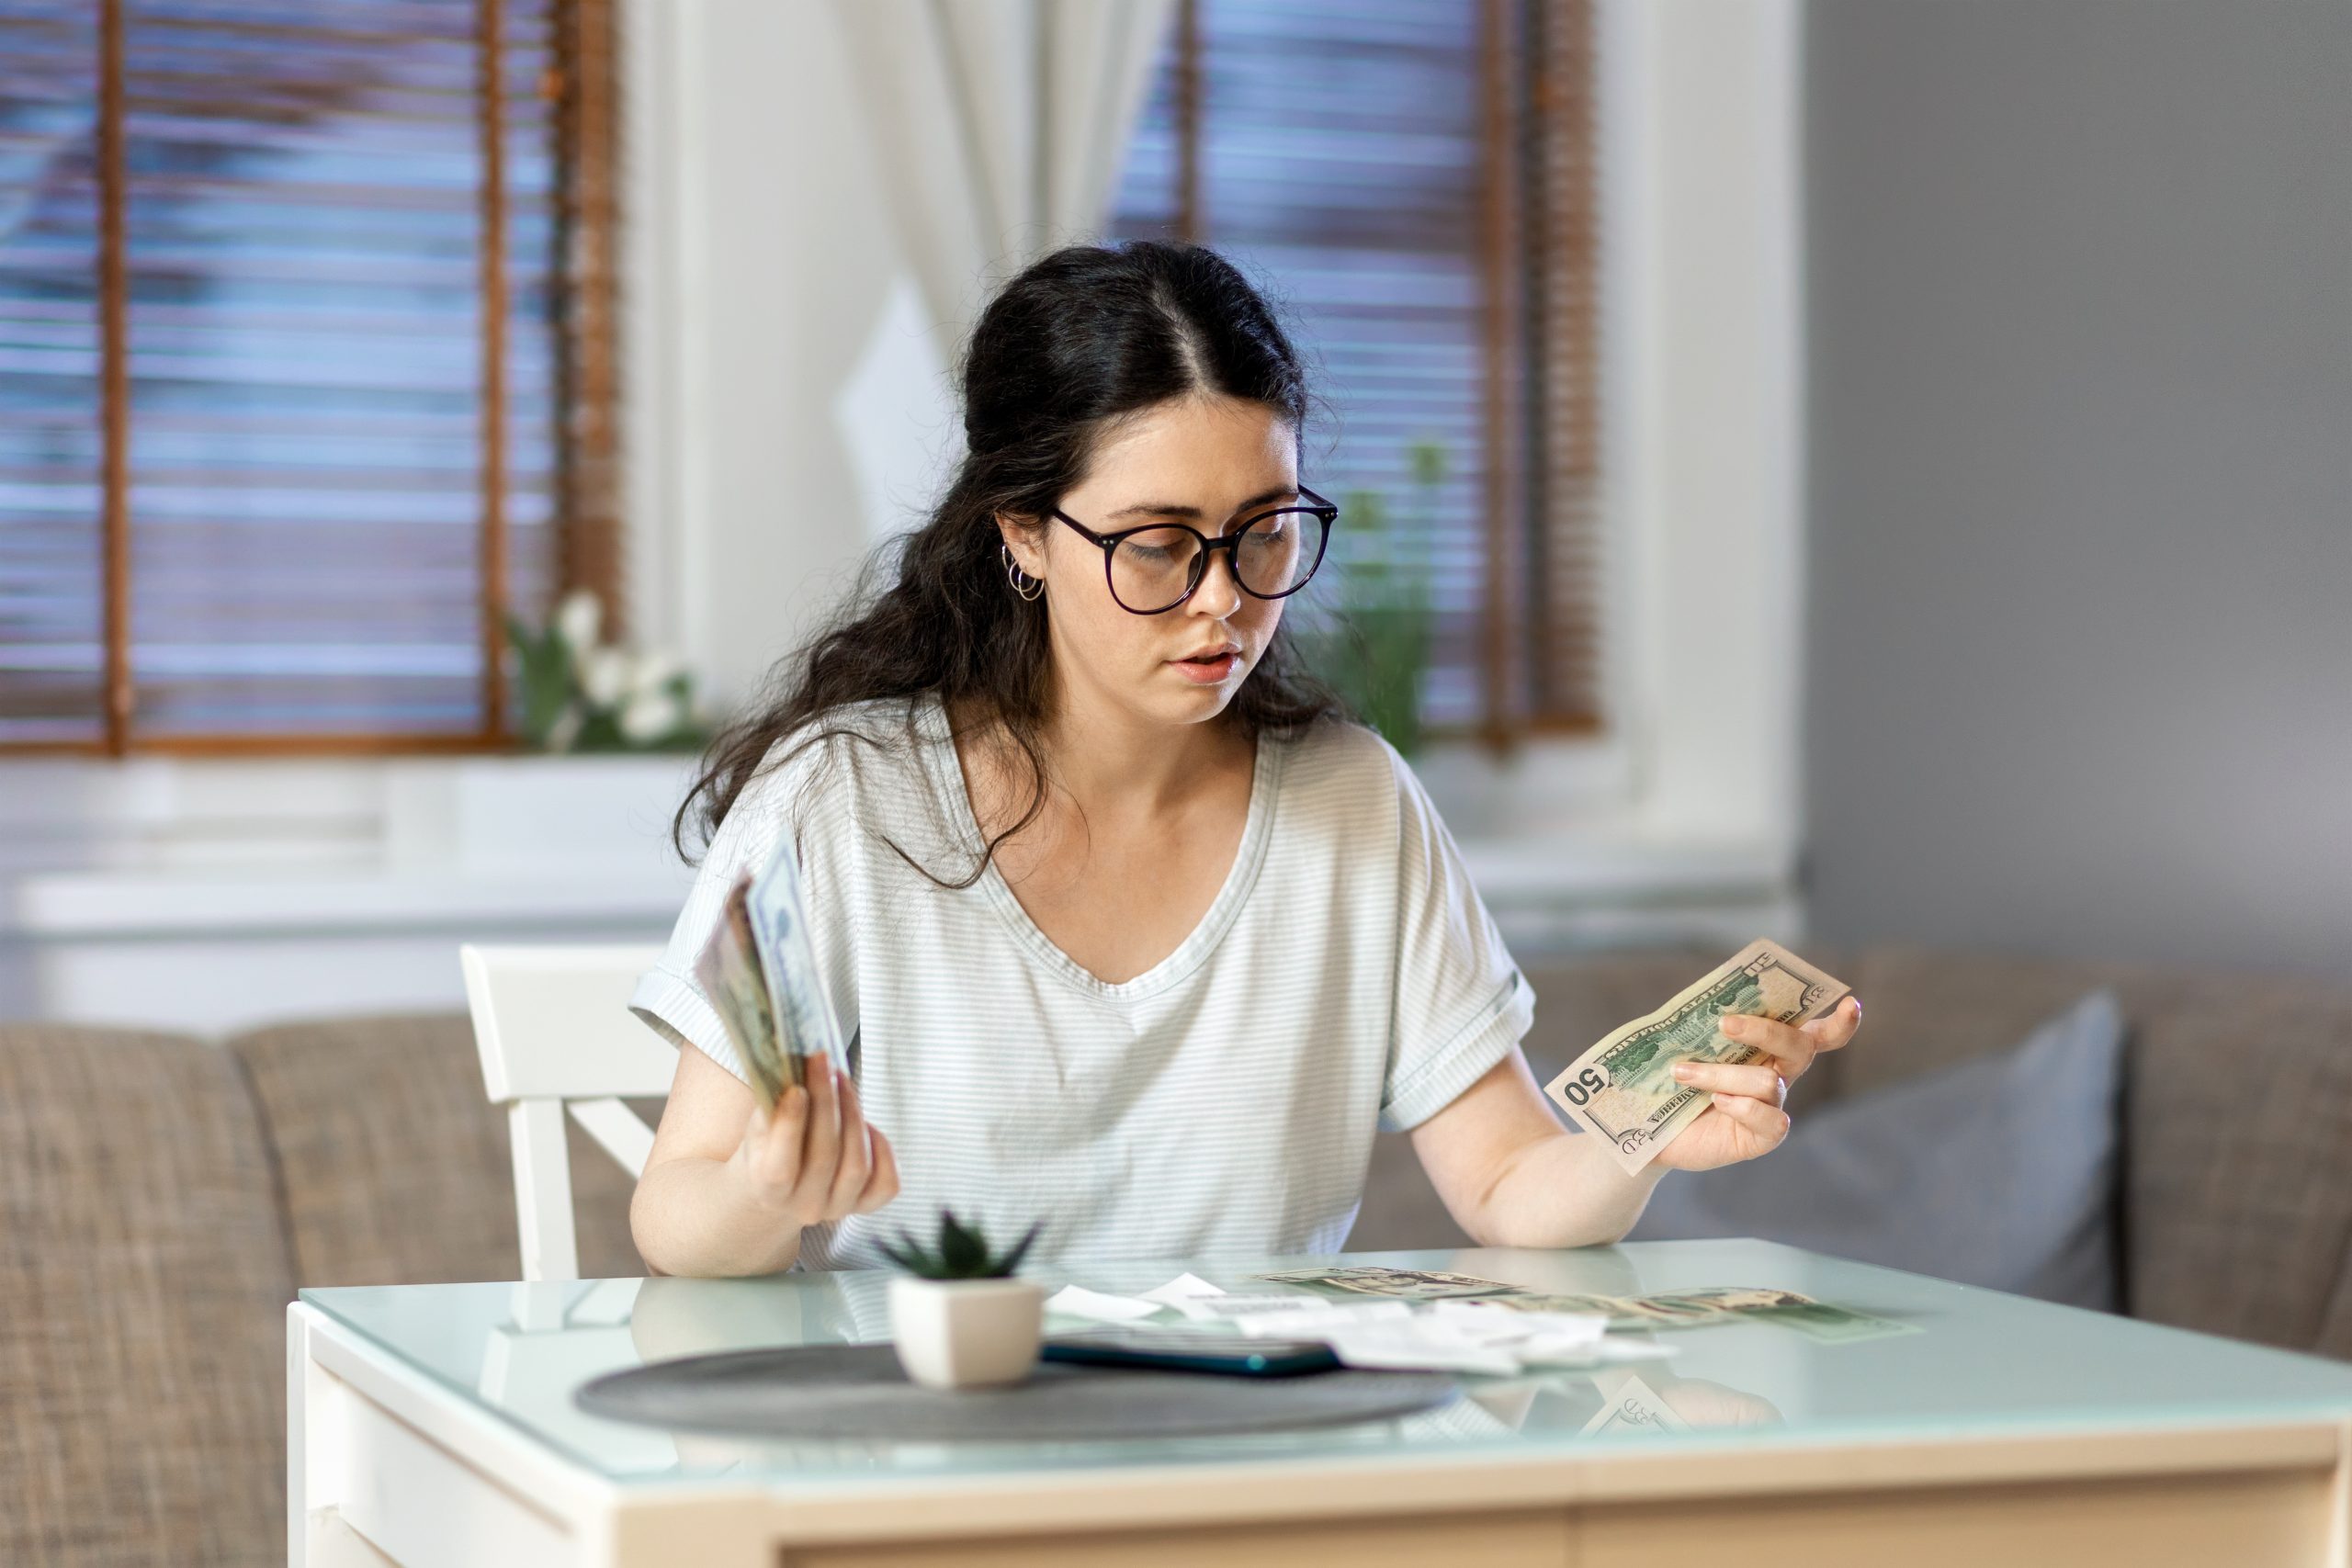 Planning of expenses. Portrait of caucasian young woman accounting cash and paper receipt. Concept of payment of utilities, tax return and savings